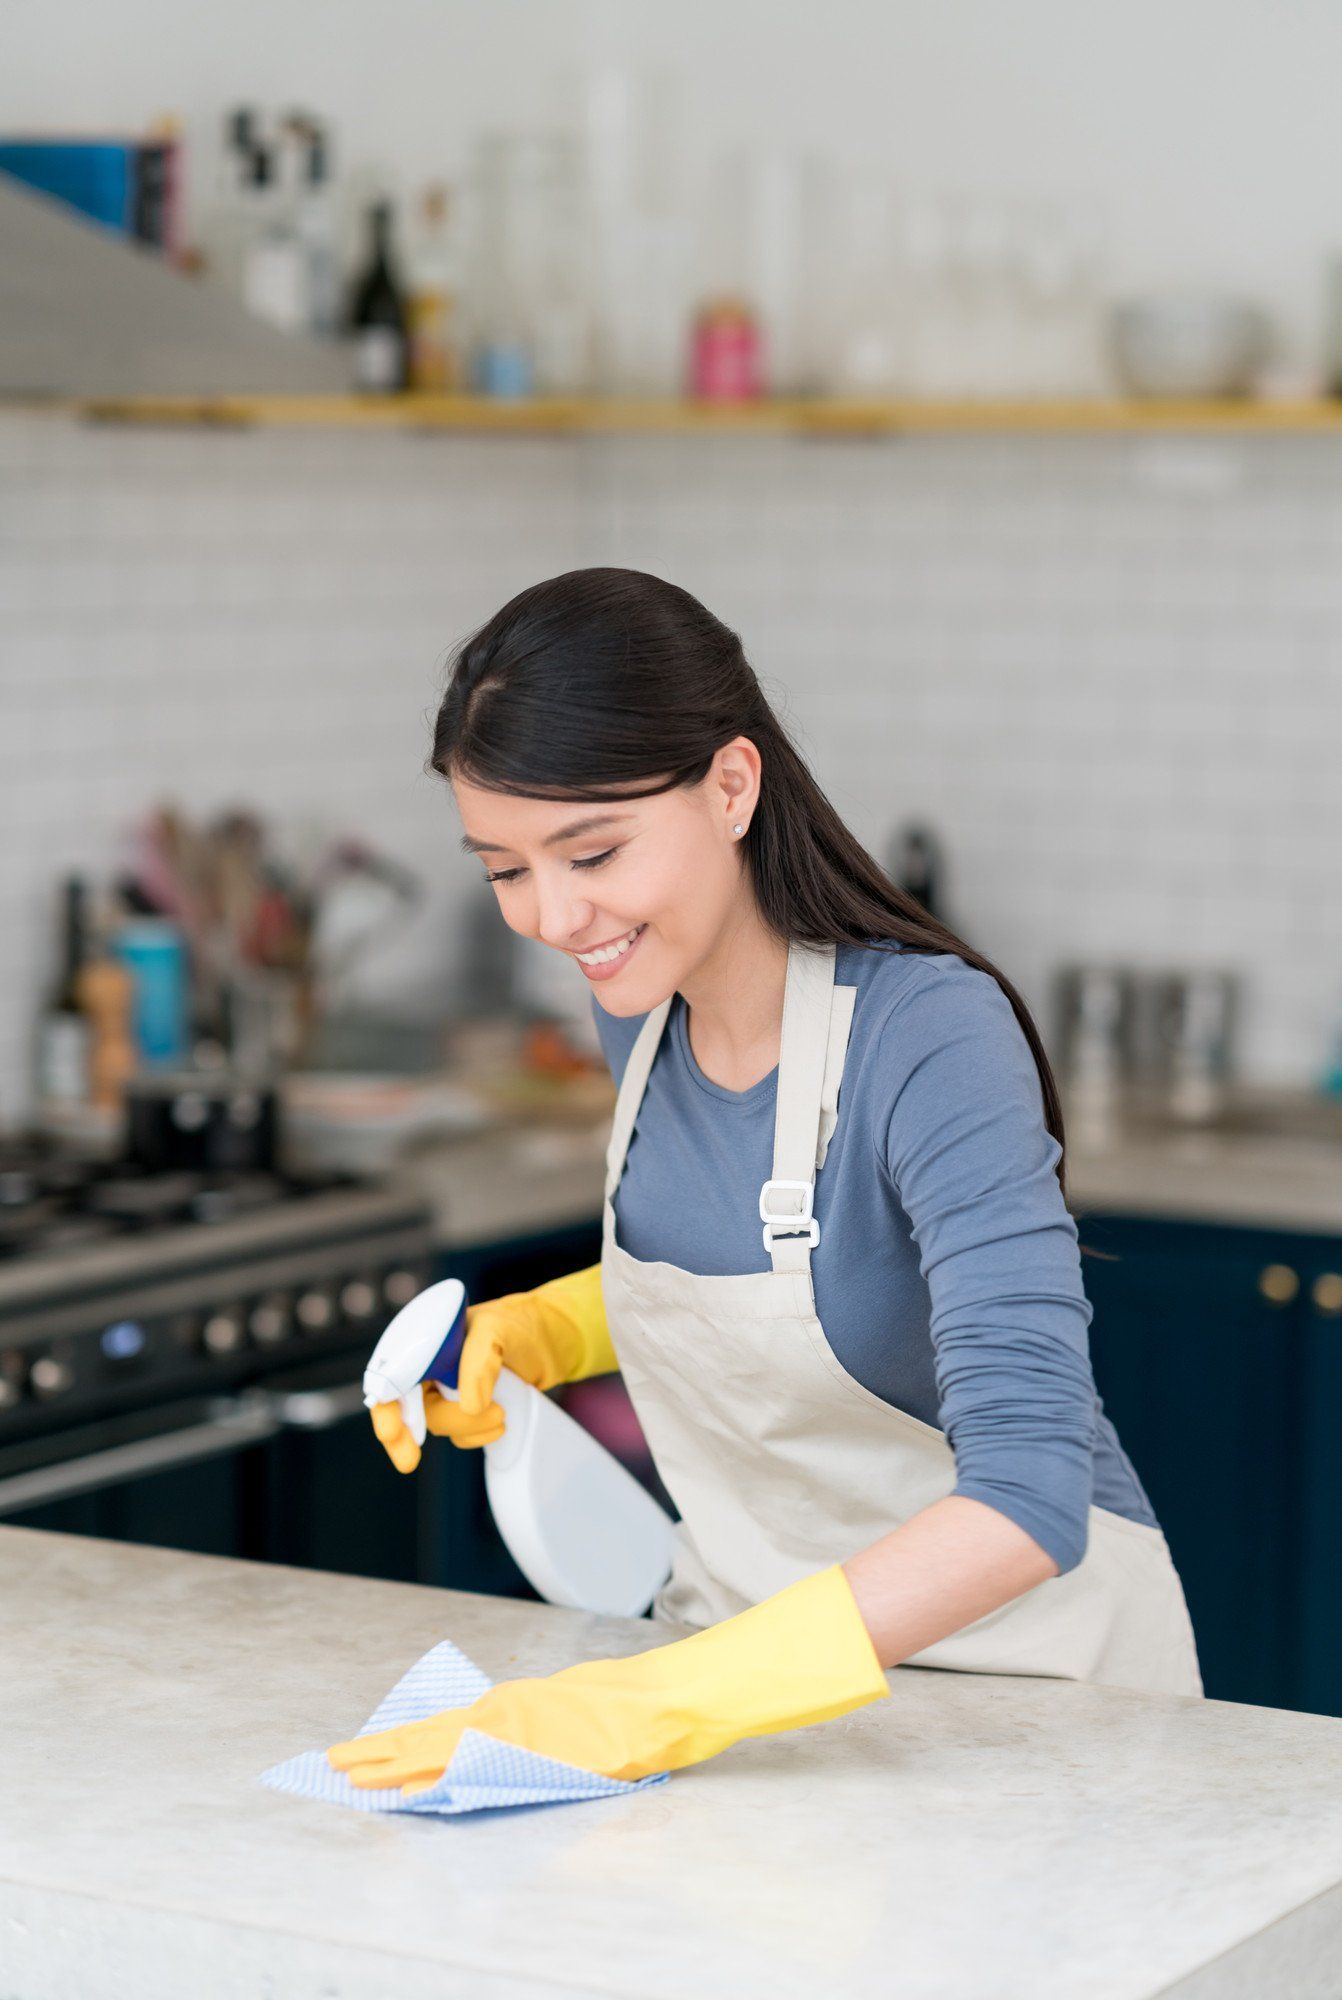 Domestic cleaning services